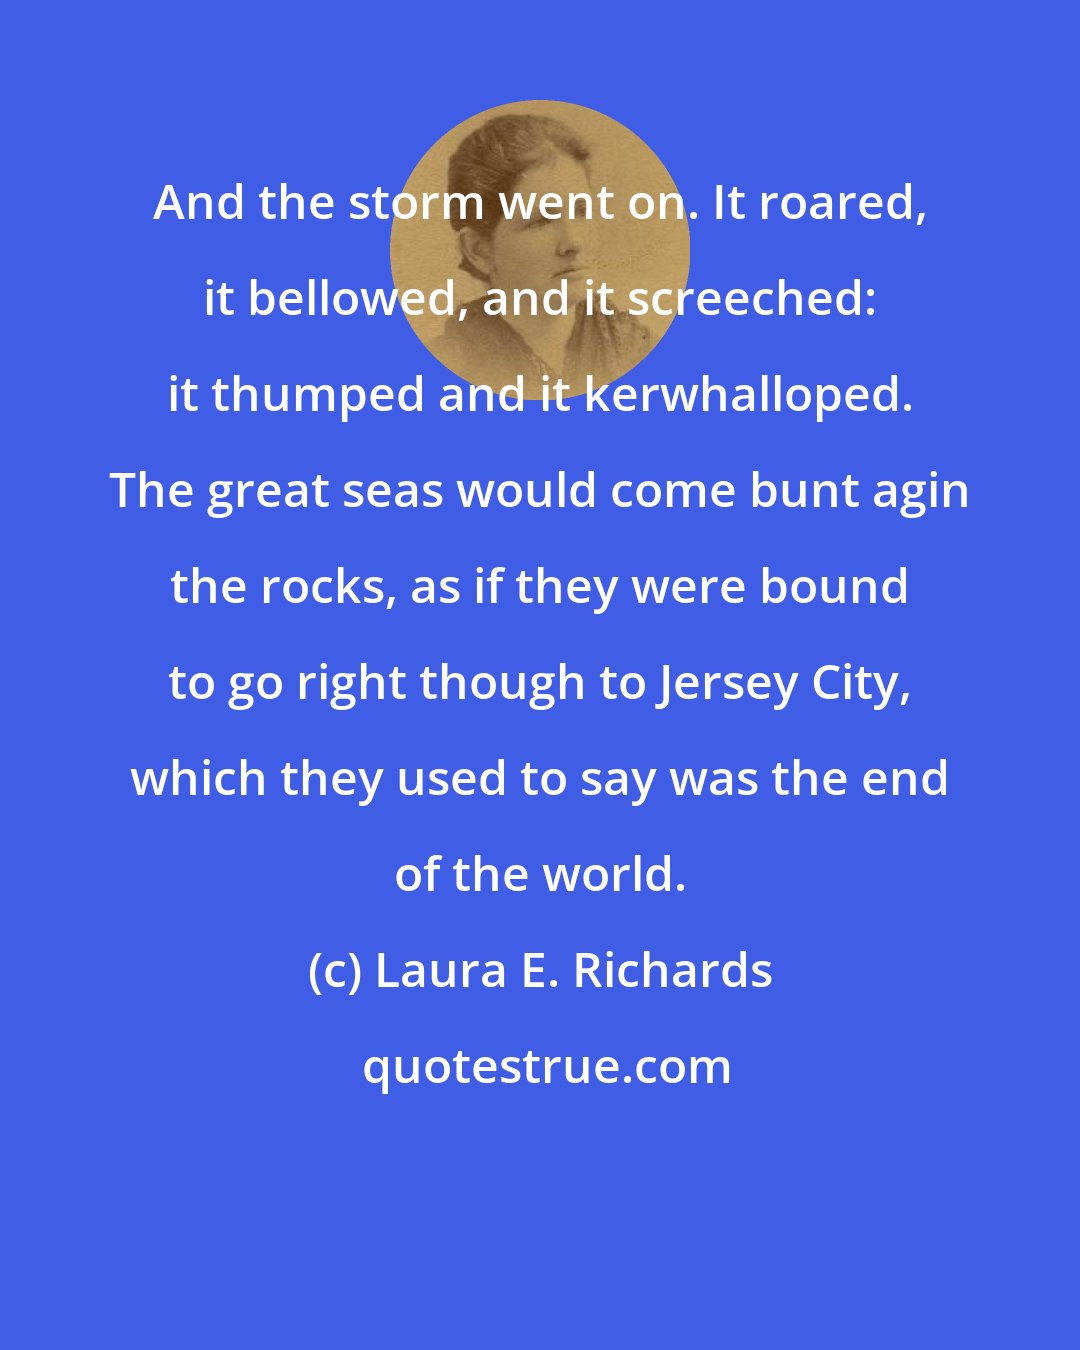 Laura E. Richards: And the storm went on. It roared, it bellowed, and it screeched: it thumped and it kerwhalloped. The great seas would come bunt agin the rocks, as if they were bound to go right though to Jersey City, which they used to say was the end of the world.